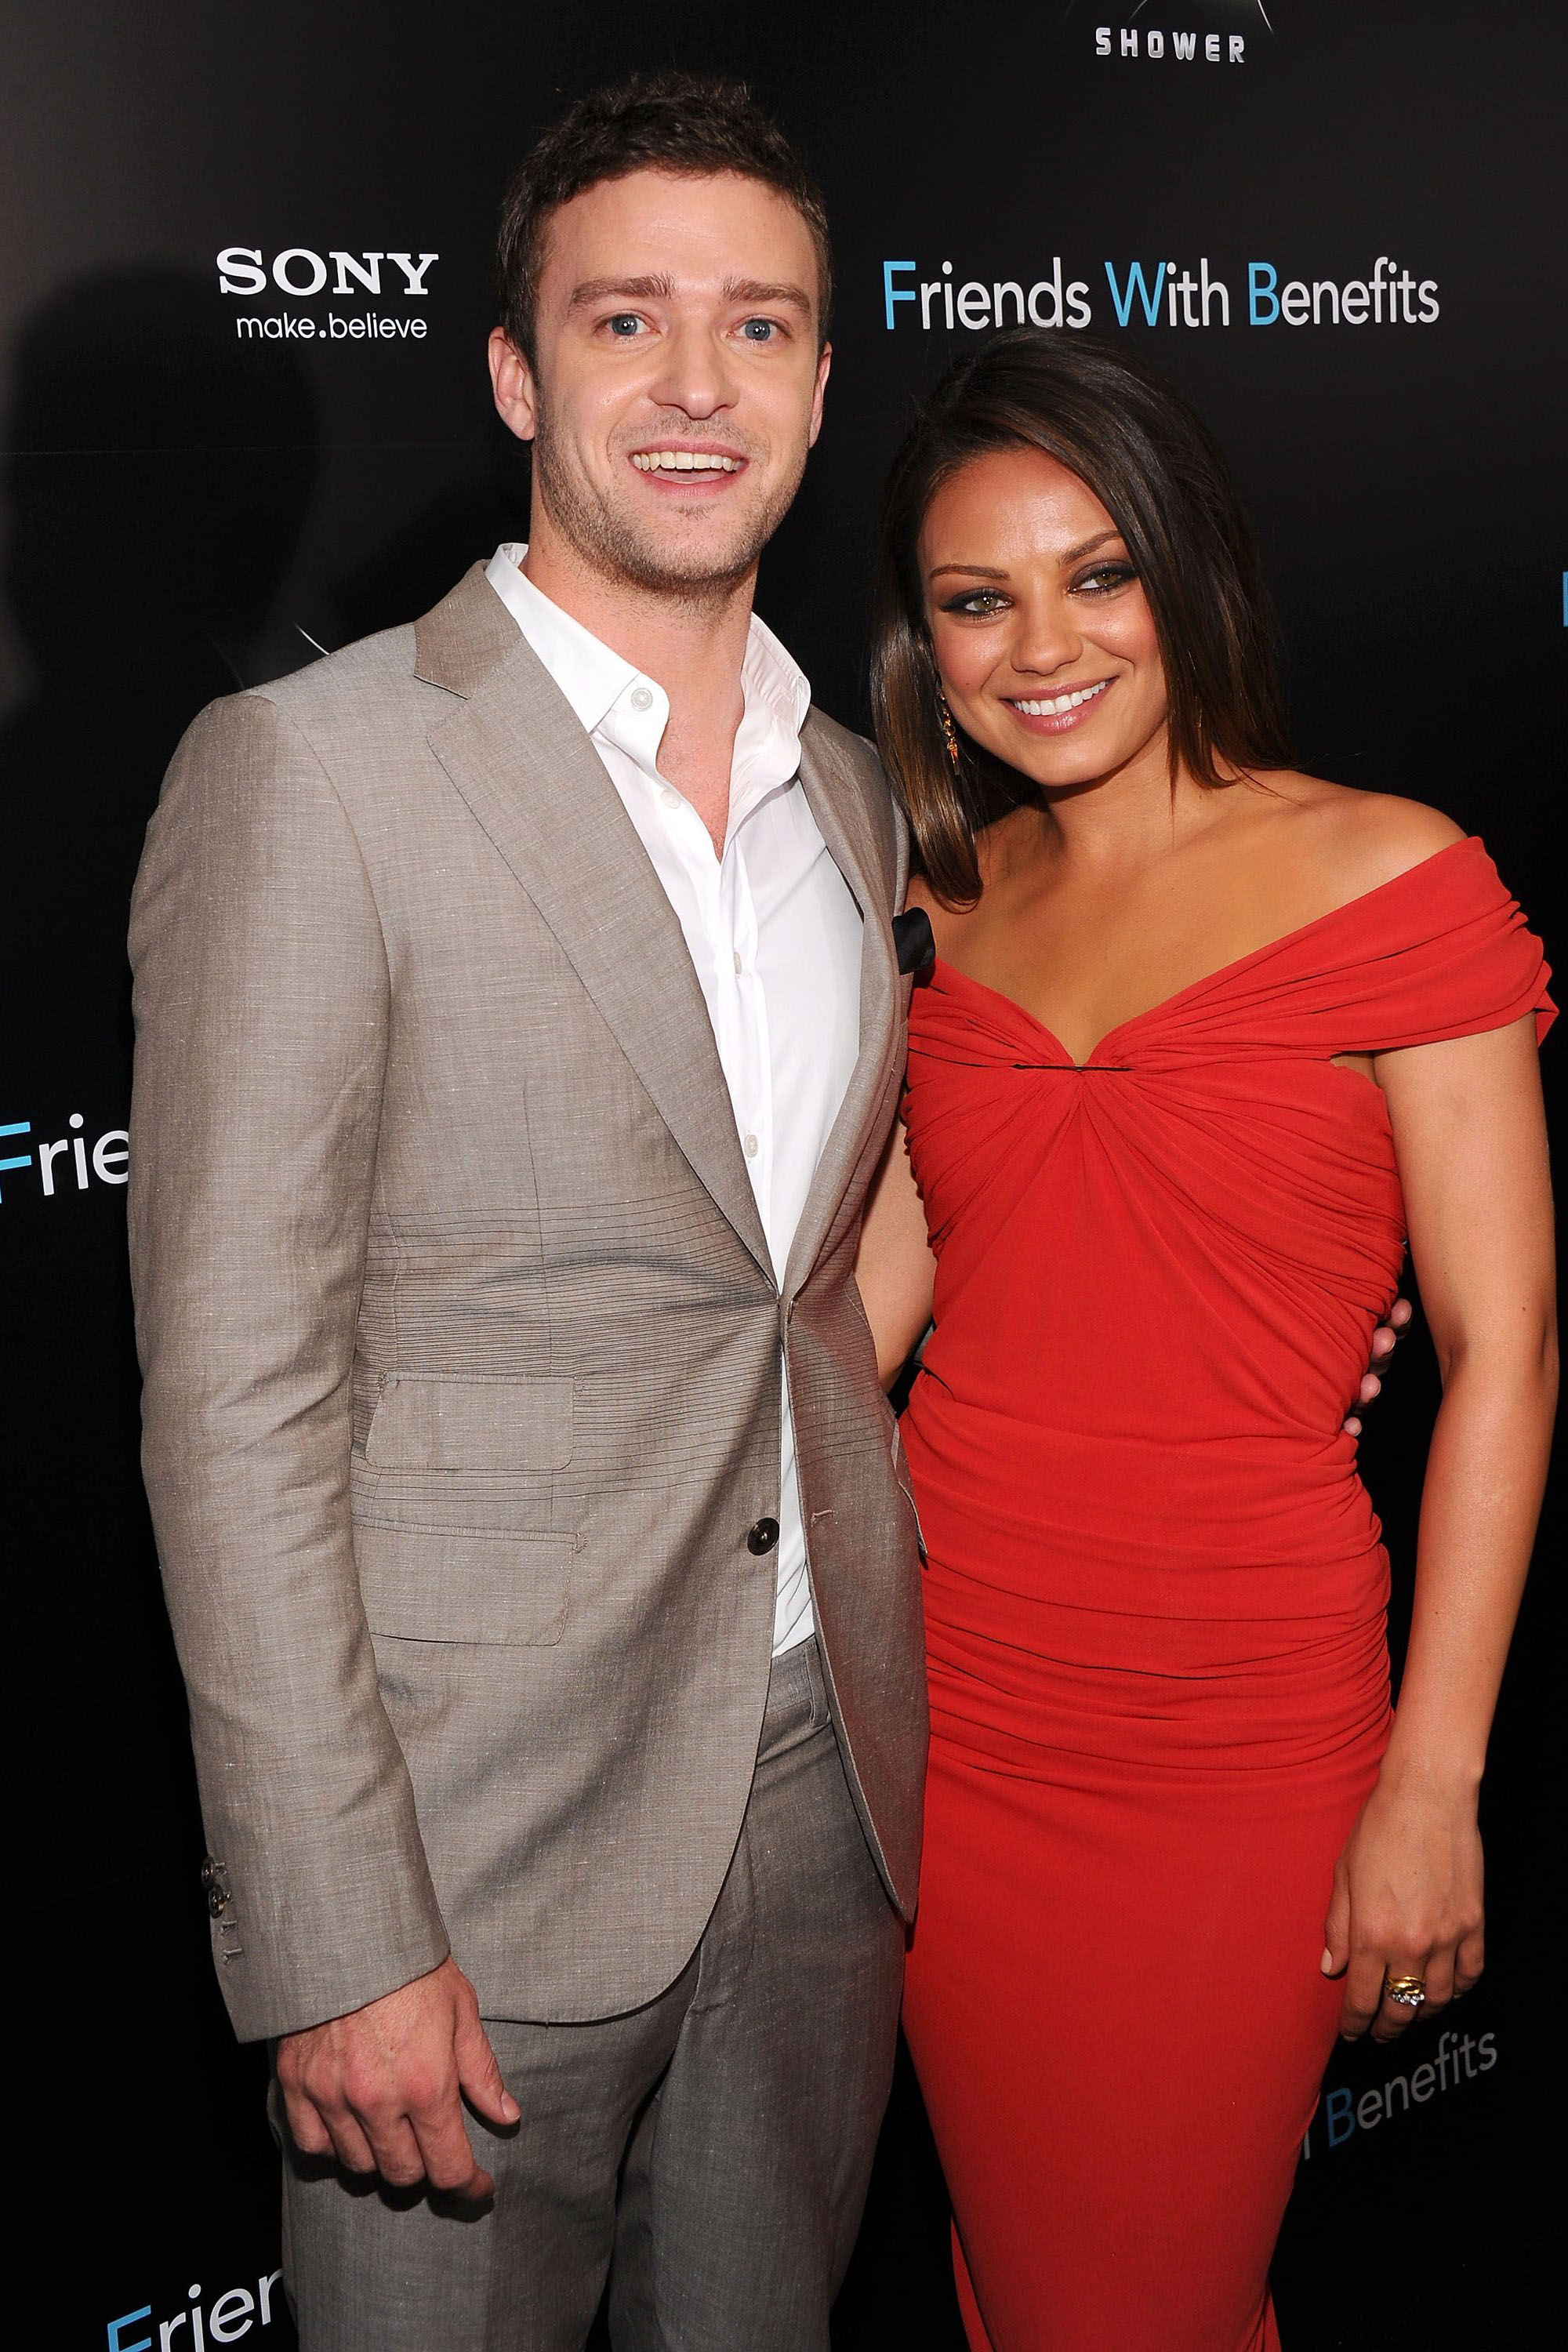 Justin Timberlake and Mila Kunis attend the Friends With Benefits New York Premiere at the Ziegfeld Theater, New York, NY  United States on 18th July 2011